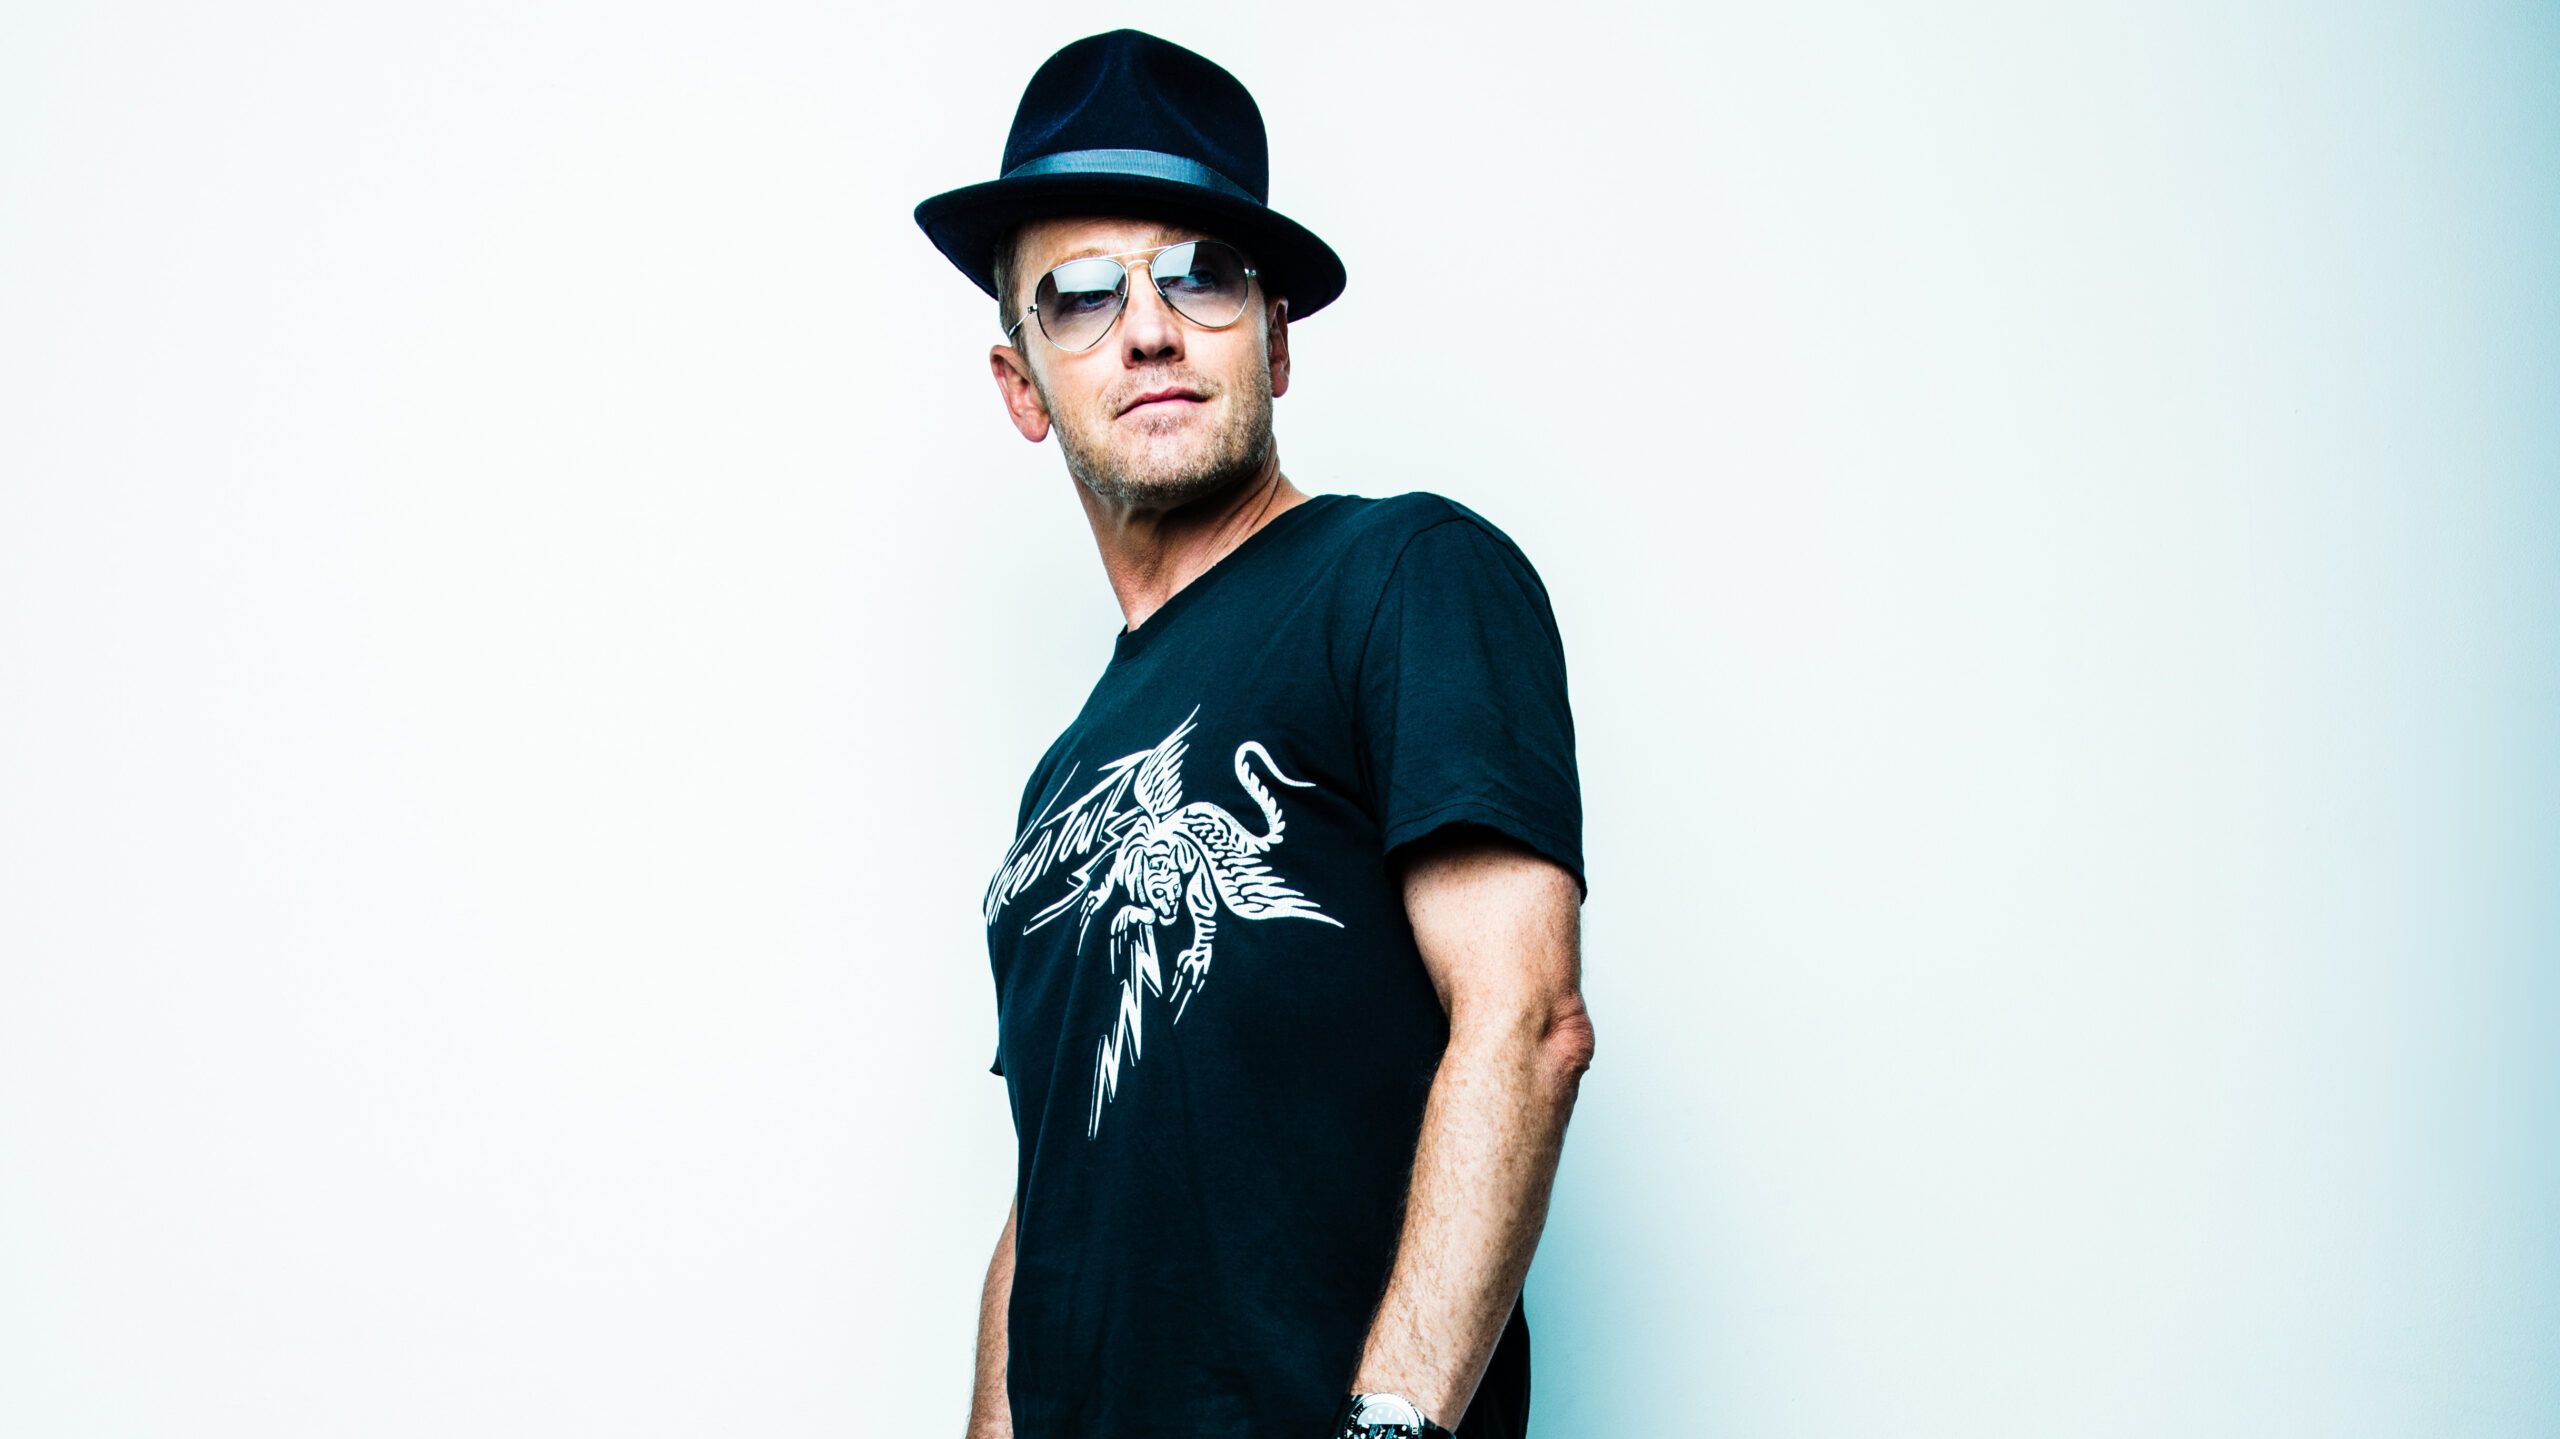 SHURE AND TOBYMAC PARTNER TO REIMAGINE WHAT IS POSSIBLE FOR